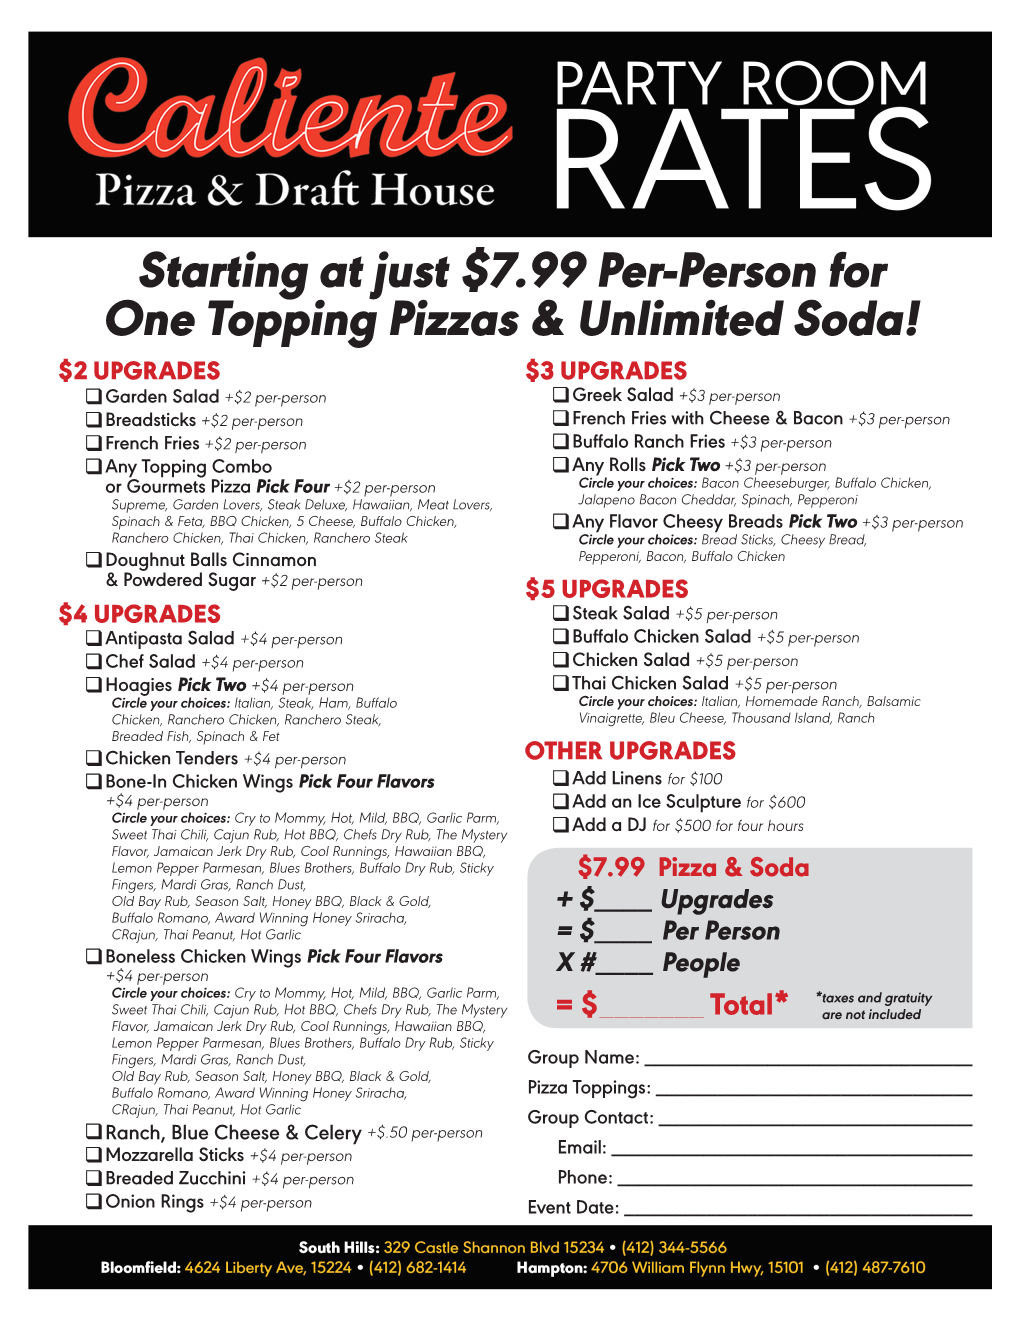 Starting at Just $7.99 Per-Person for One Topping Pizzas & Unlimited